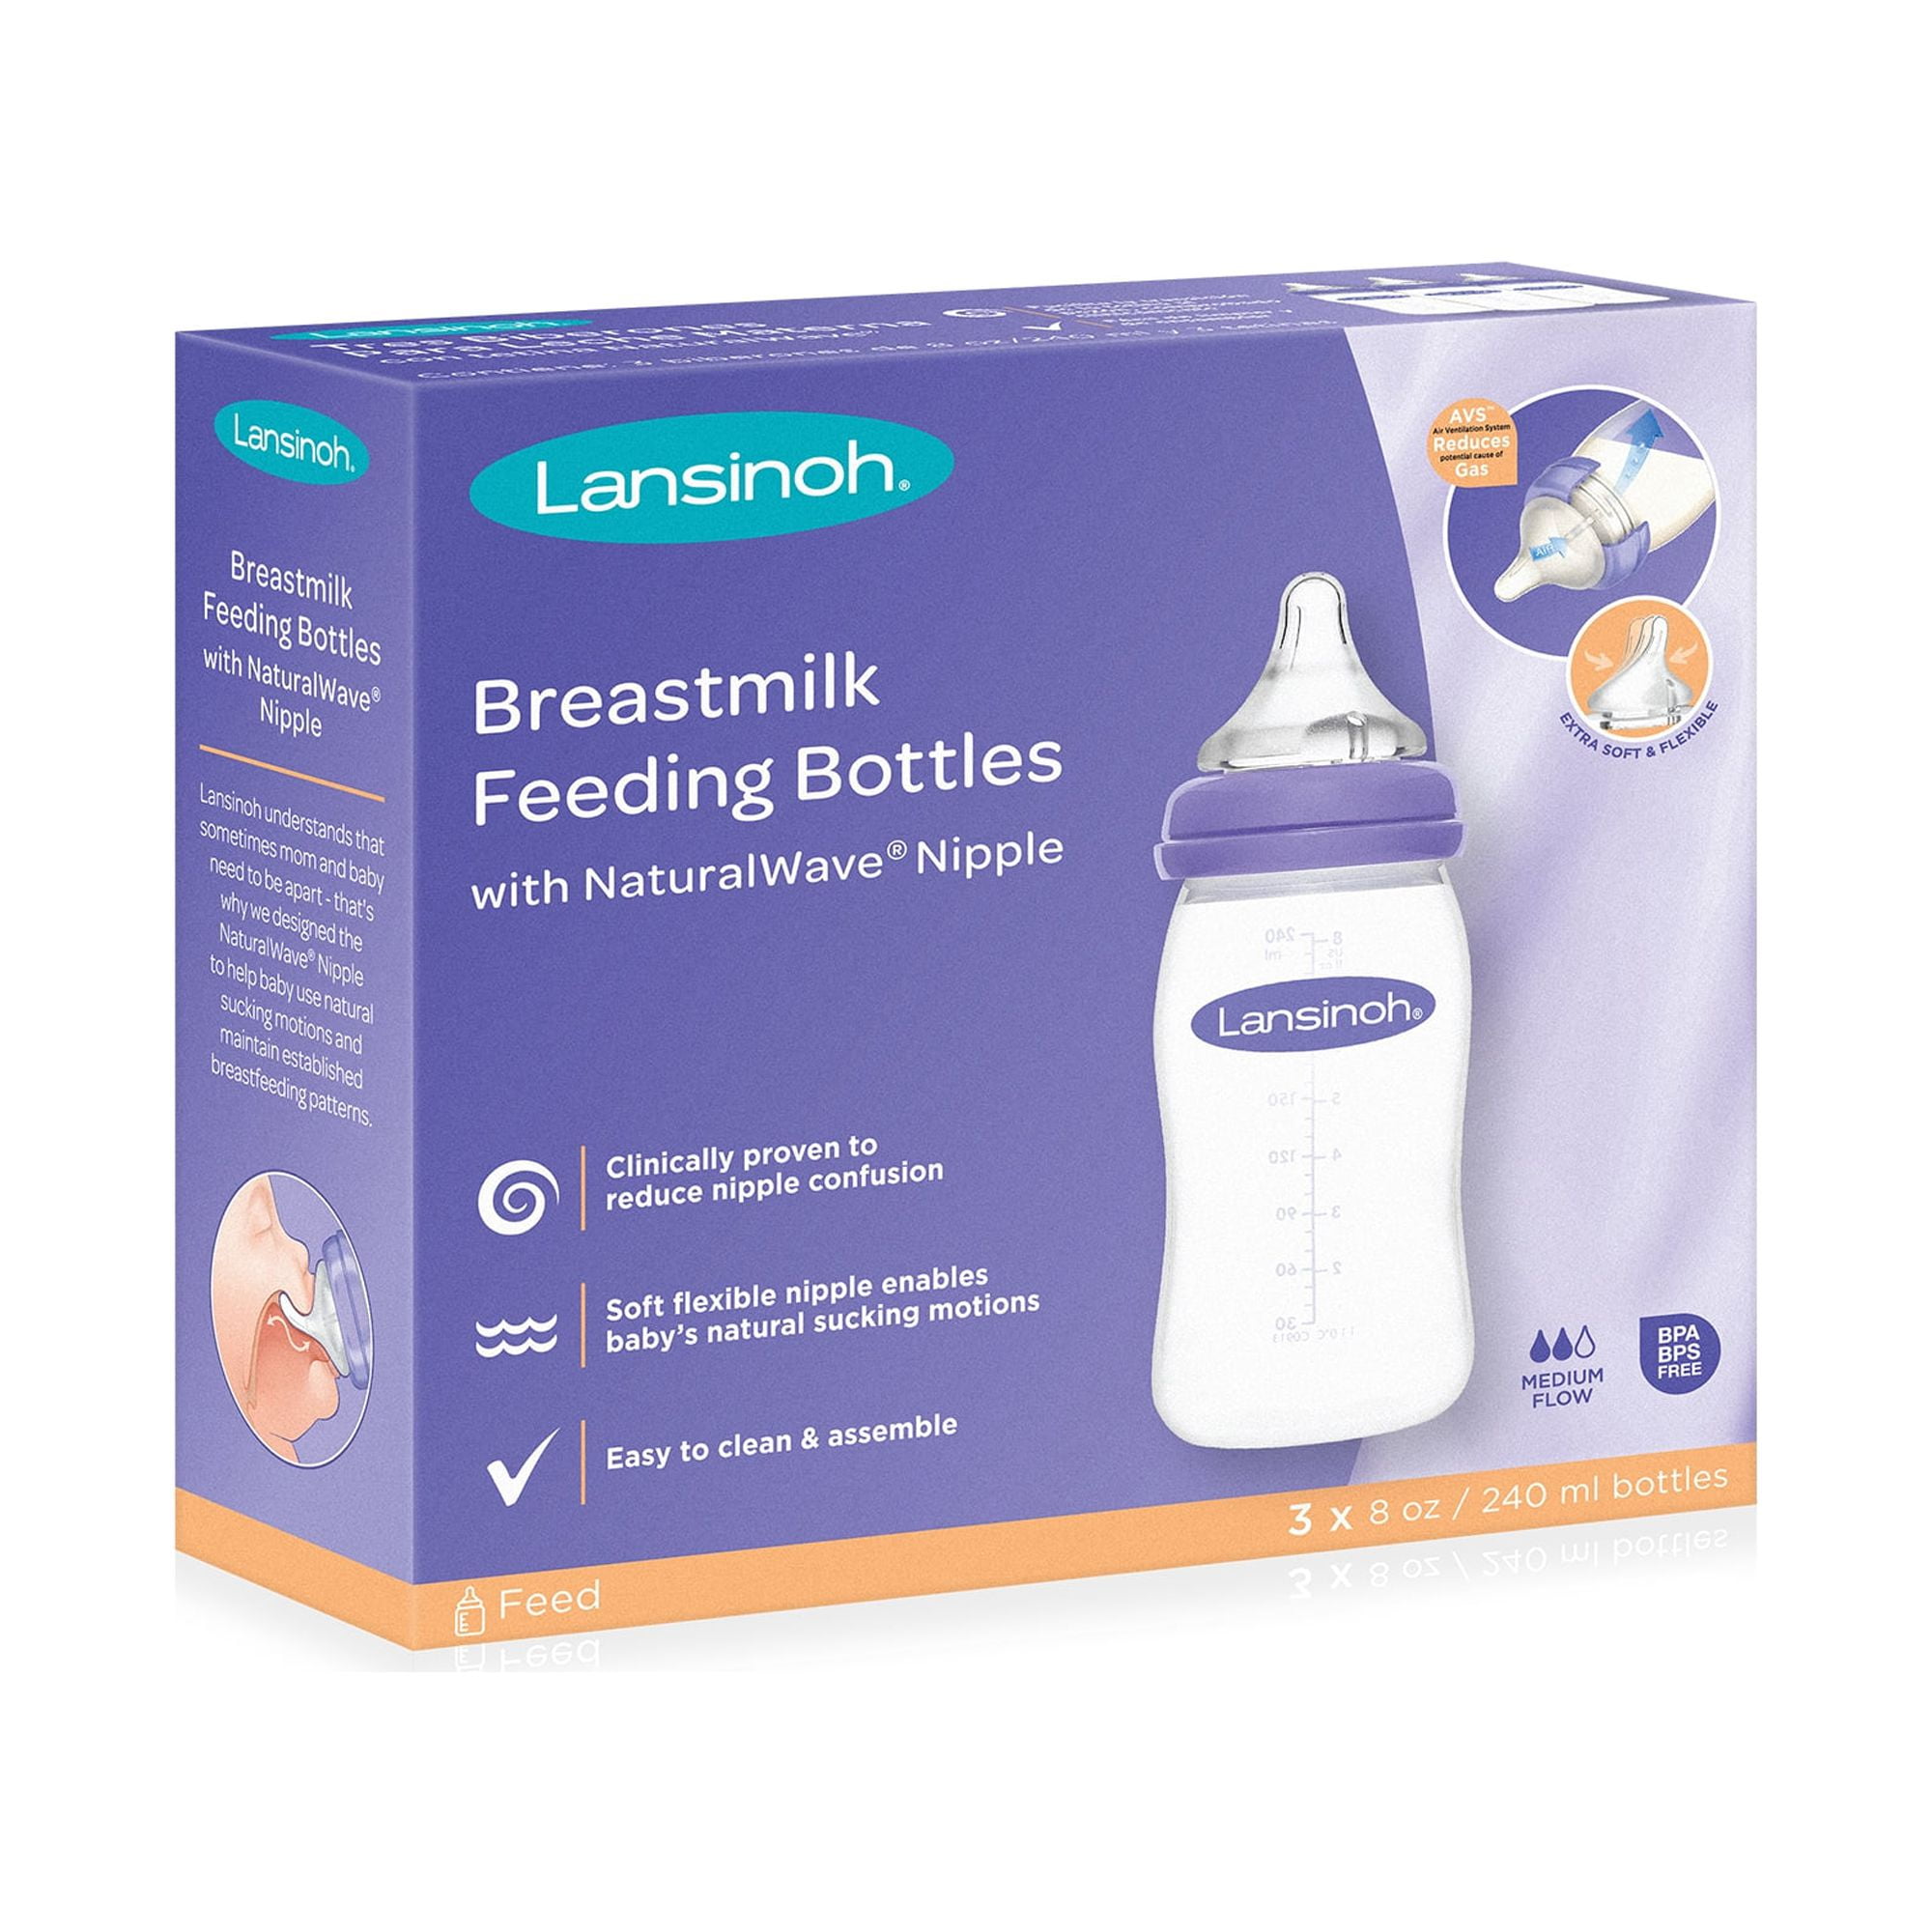 Lansinoh Glass Baby Bottles for Breastfeeding Babies Includes 4 Medium Flow  Nipples (Size 3M) 8 Ounce (Pack of 4)